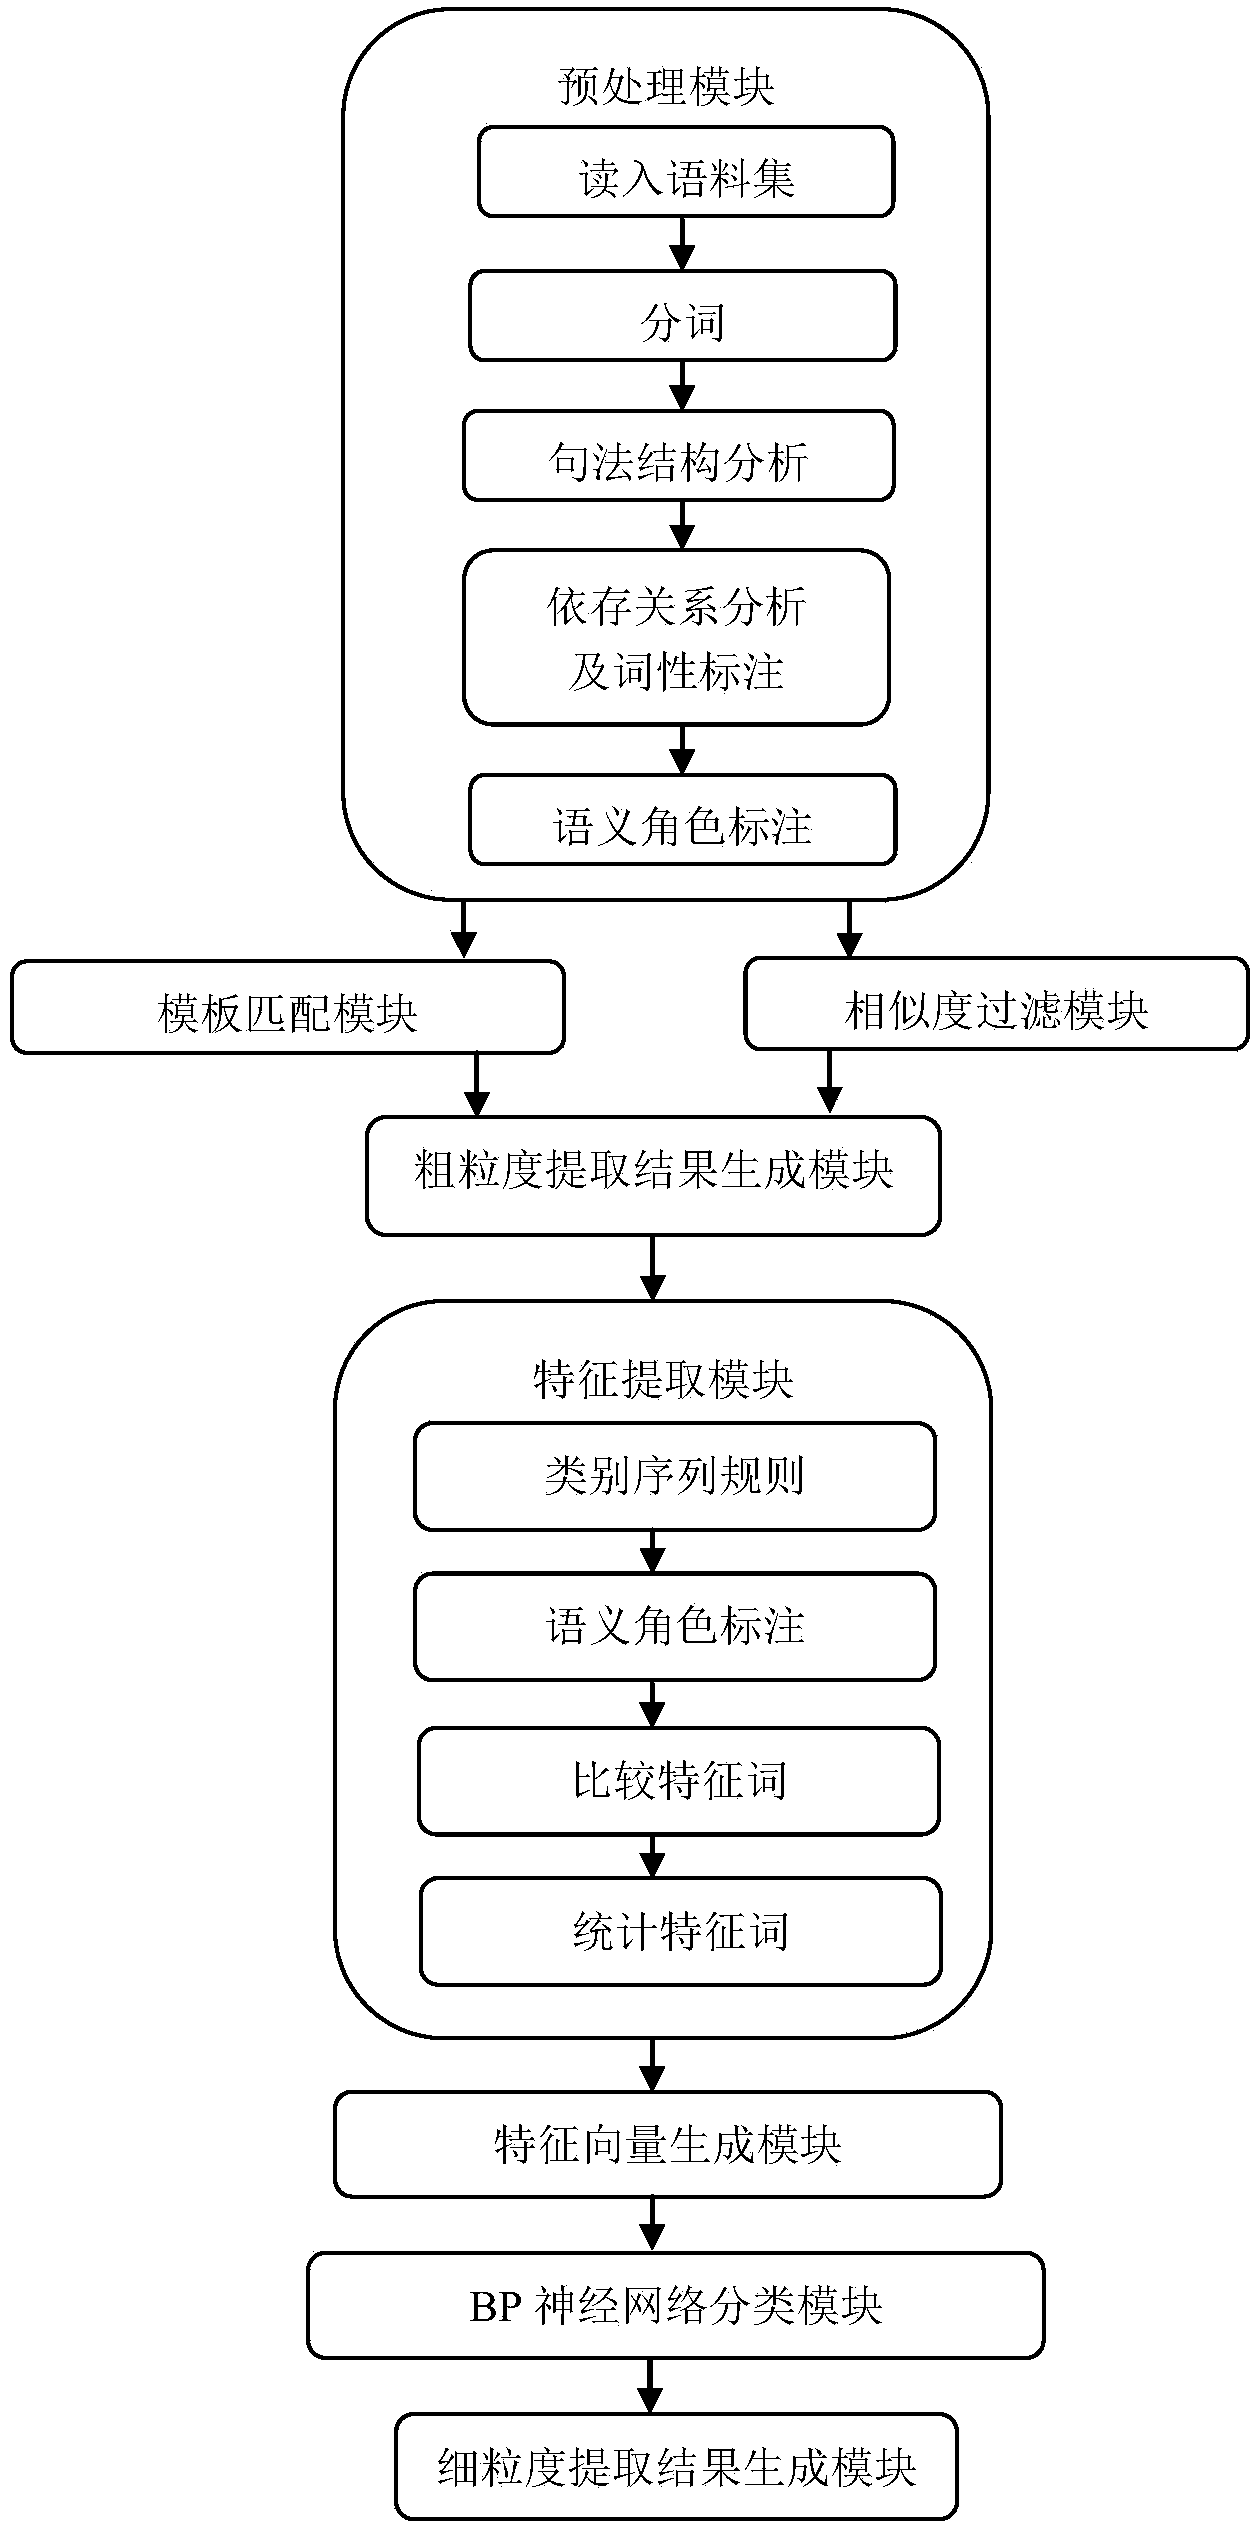 Chinese comparative sentence recognizing method and device based on neural network